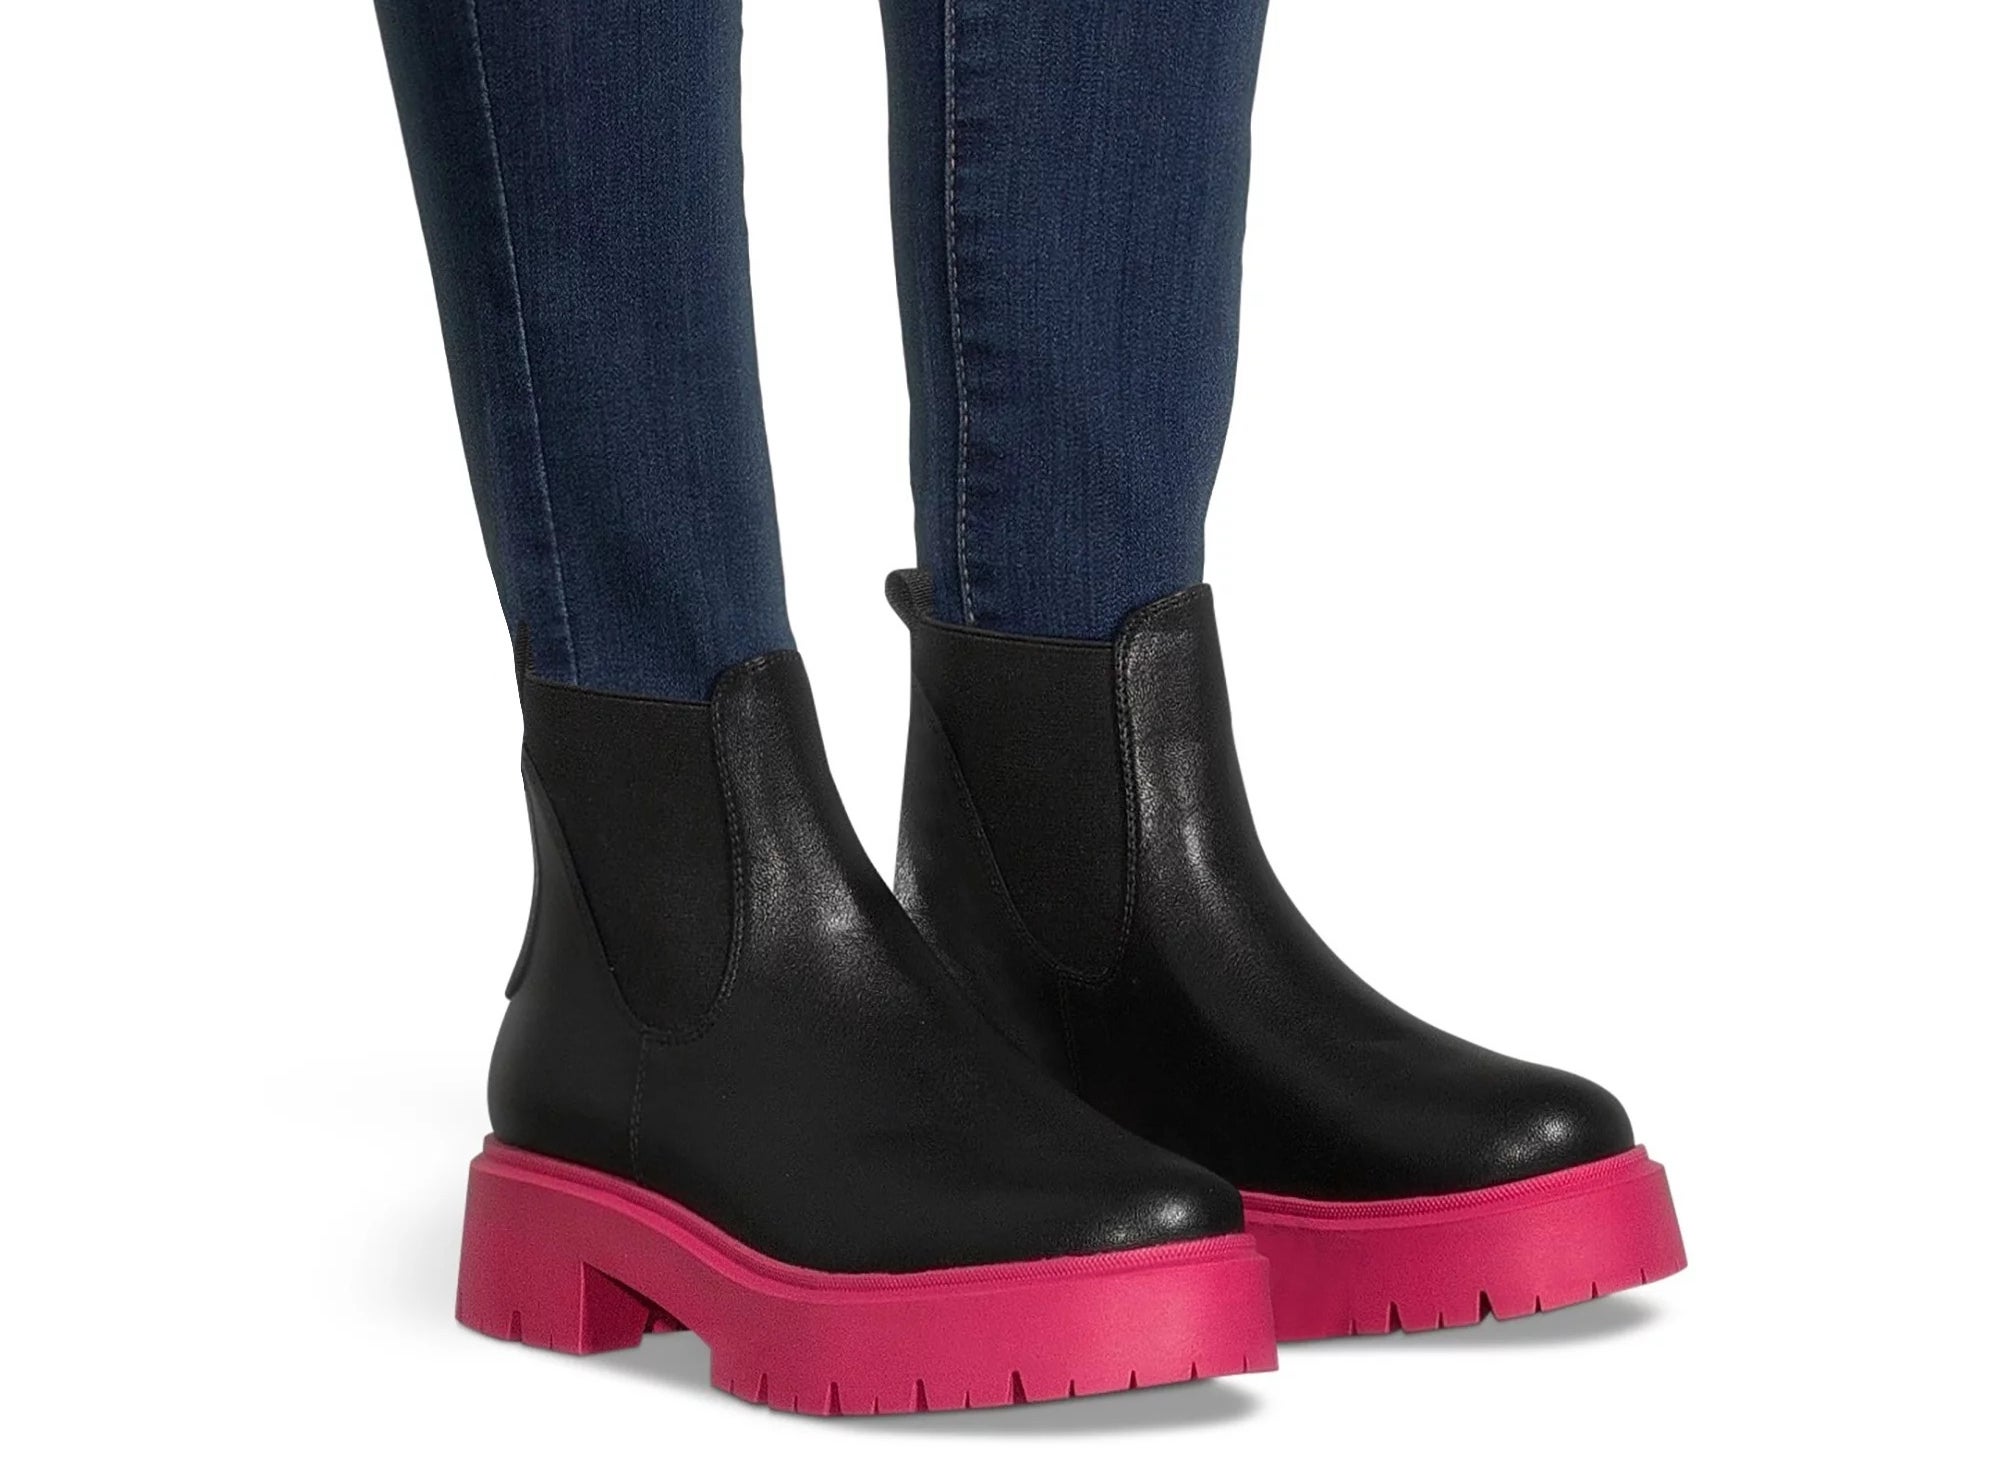 A model wearing the black boots with hot pink soles